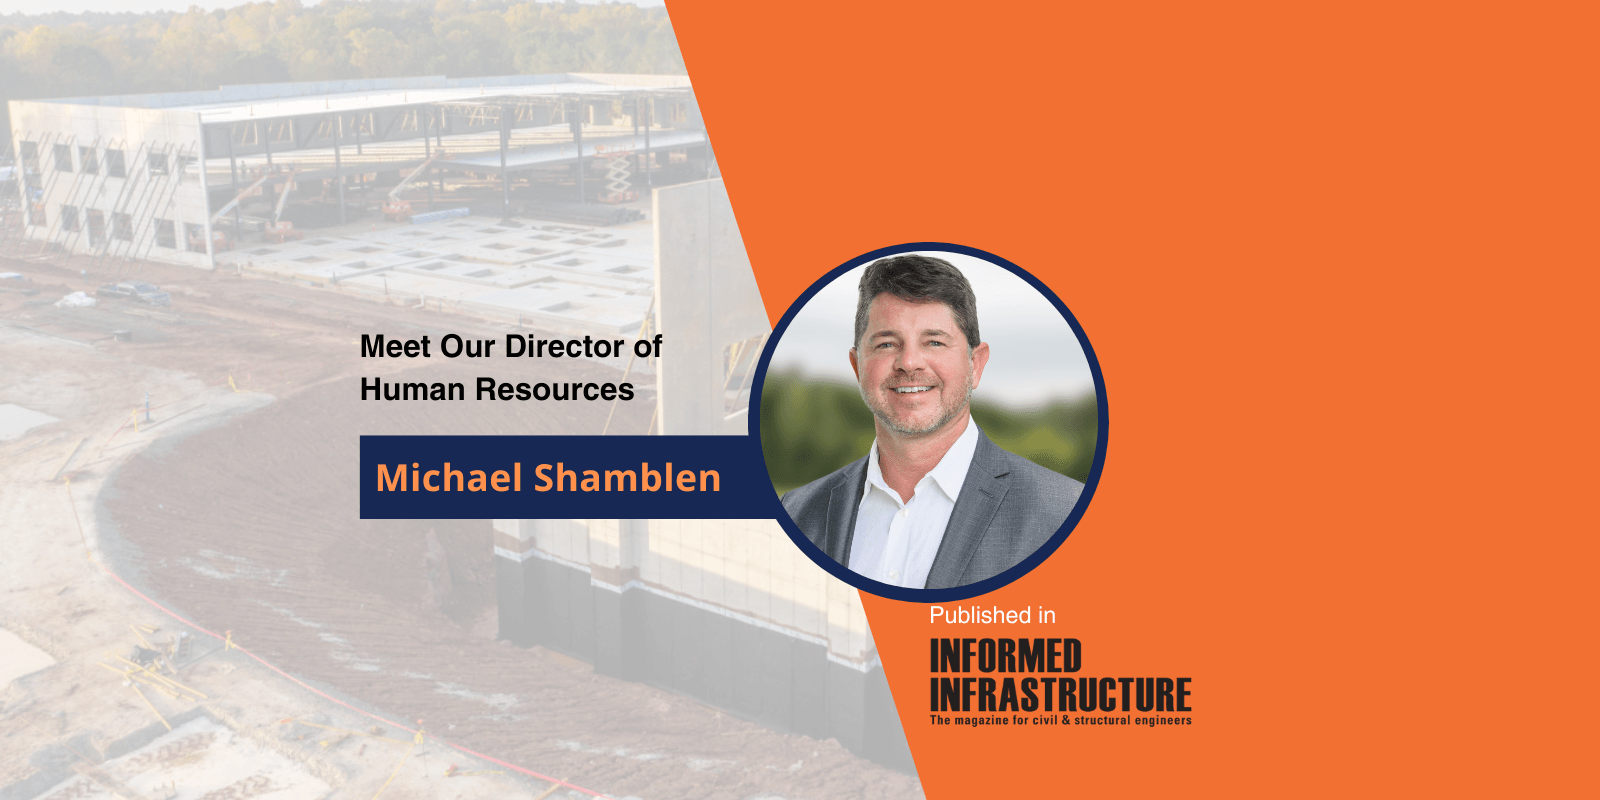 Featured image for “Michael Shamblen Appointed Director of Human Resources at T&T Construction Management Group, Inc., Published in Informed Infrastructure”